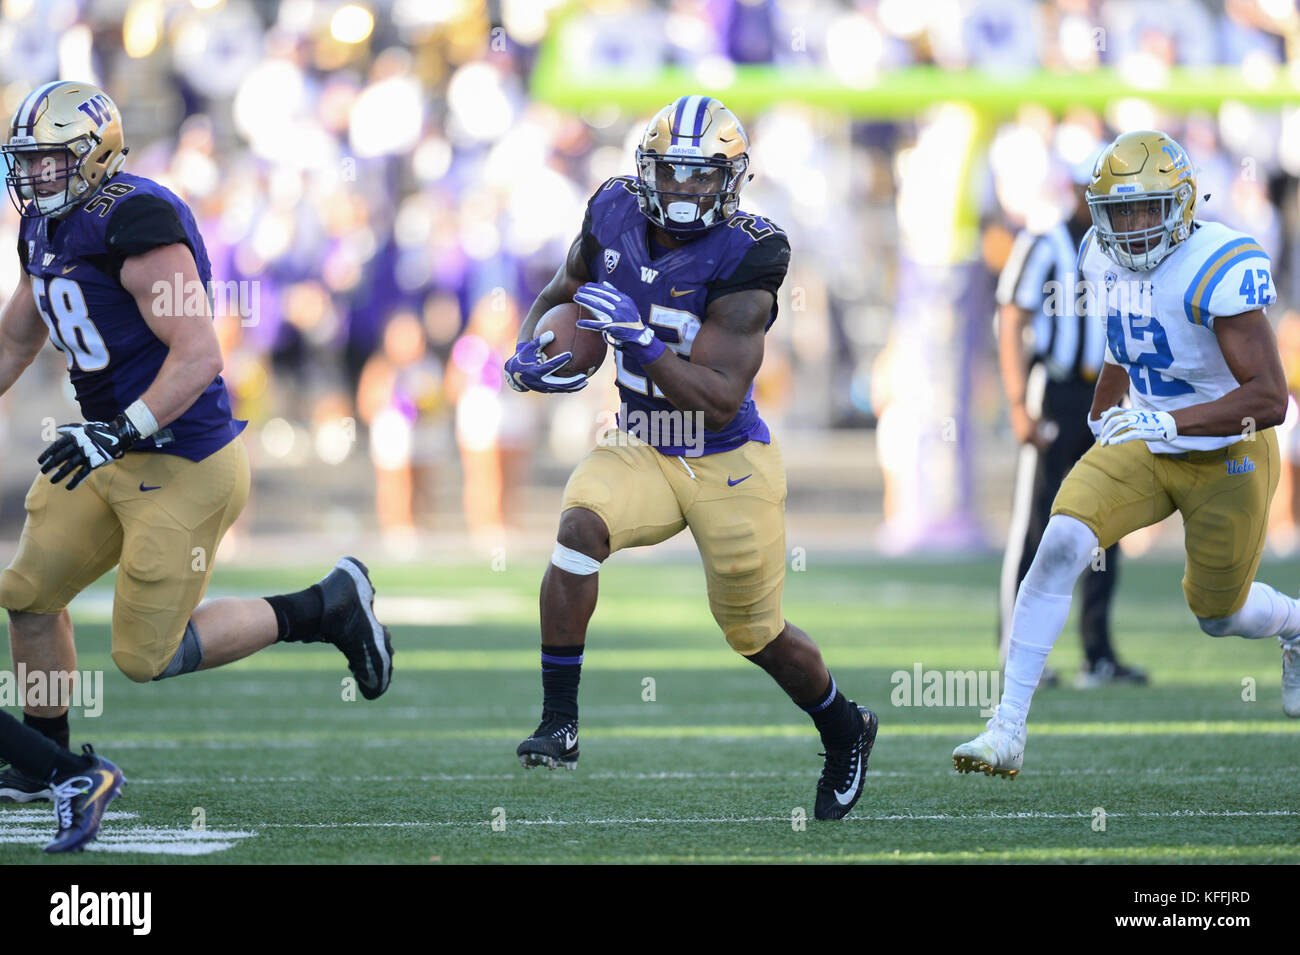 Seattle, WA, USA. 28th Oct, 2017. UW running back Lavon Coleman (22) breaks away for a 33 yard touchdown run during a game between the UCLA Bruins and the Washington Huskies. Washington won the PAC12 game 44-23 The game was played at Husky Stadium on the University of Washington campus in Seattle, WA. Jeff Halstead/CSM/Alamy Live News Stock Photo